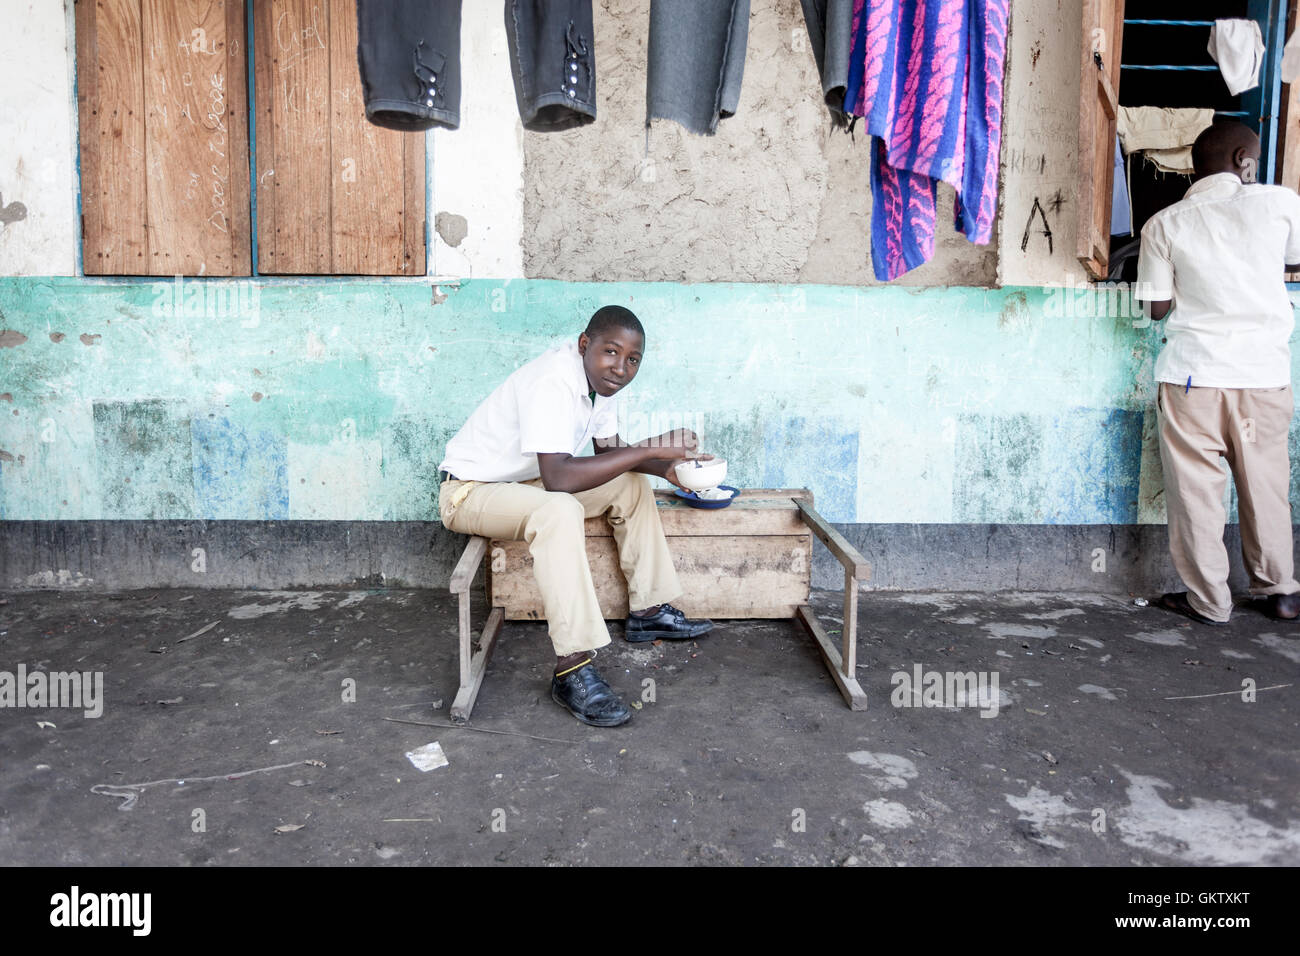 A student eats lunch during a break in studies at a school in Uganda Stock Photo